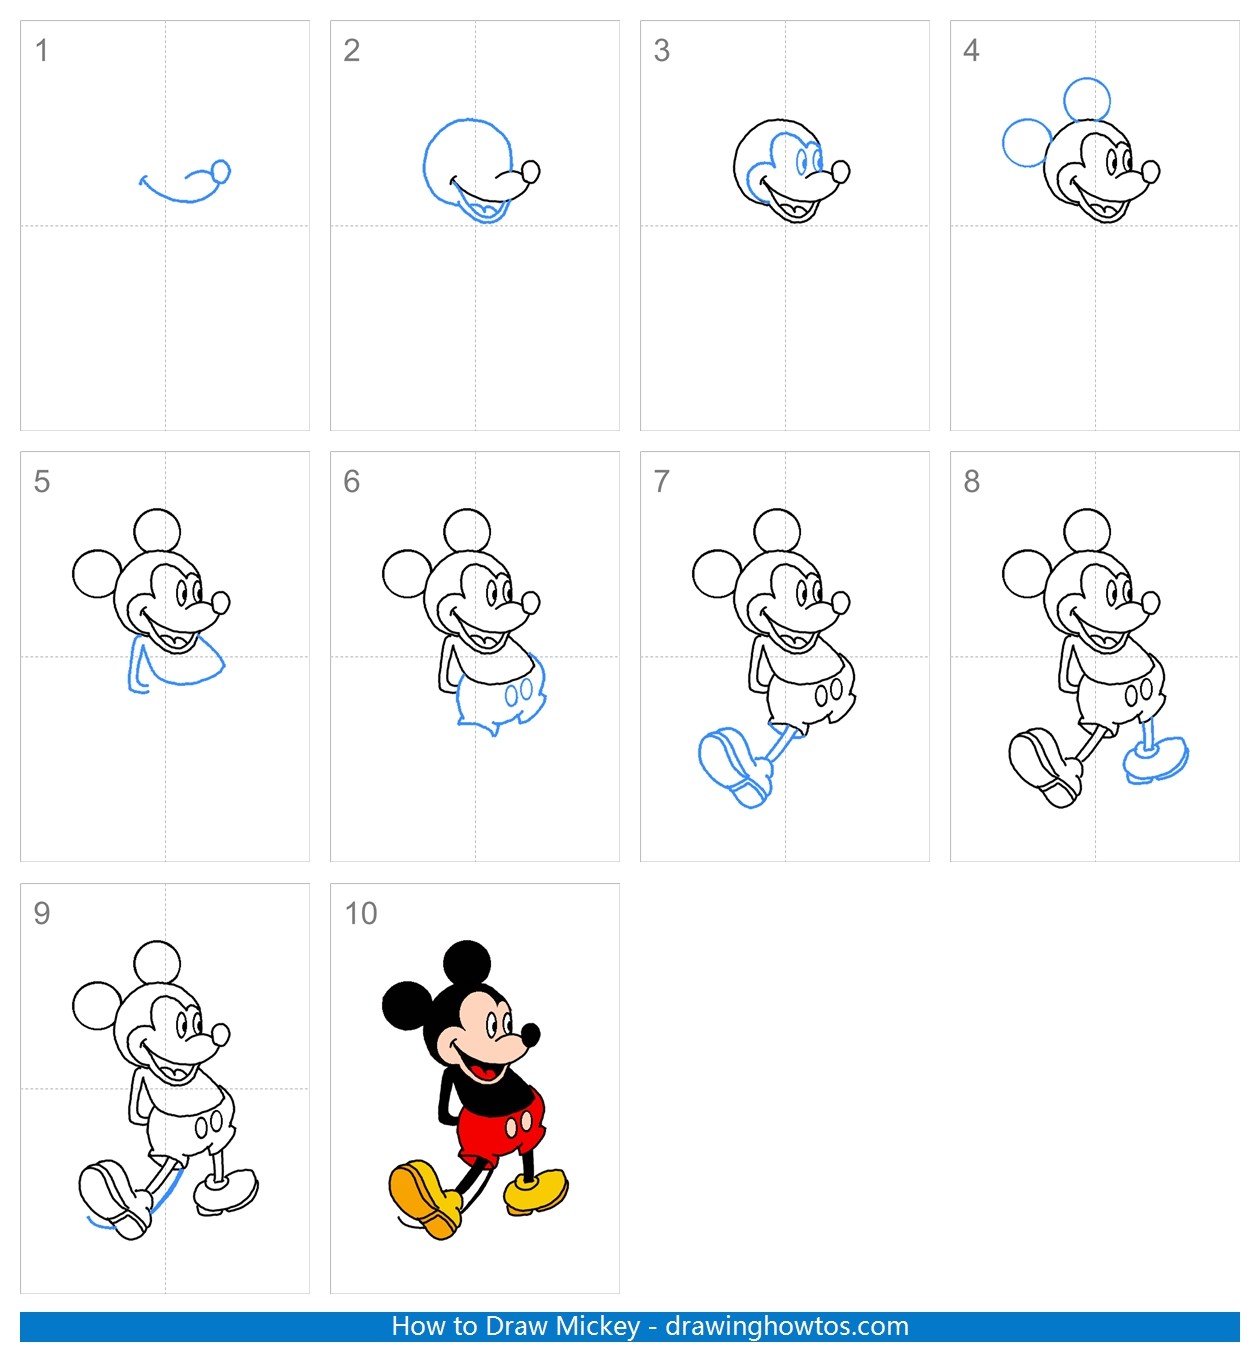 How to Draw Mickey Mouse Step by Step